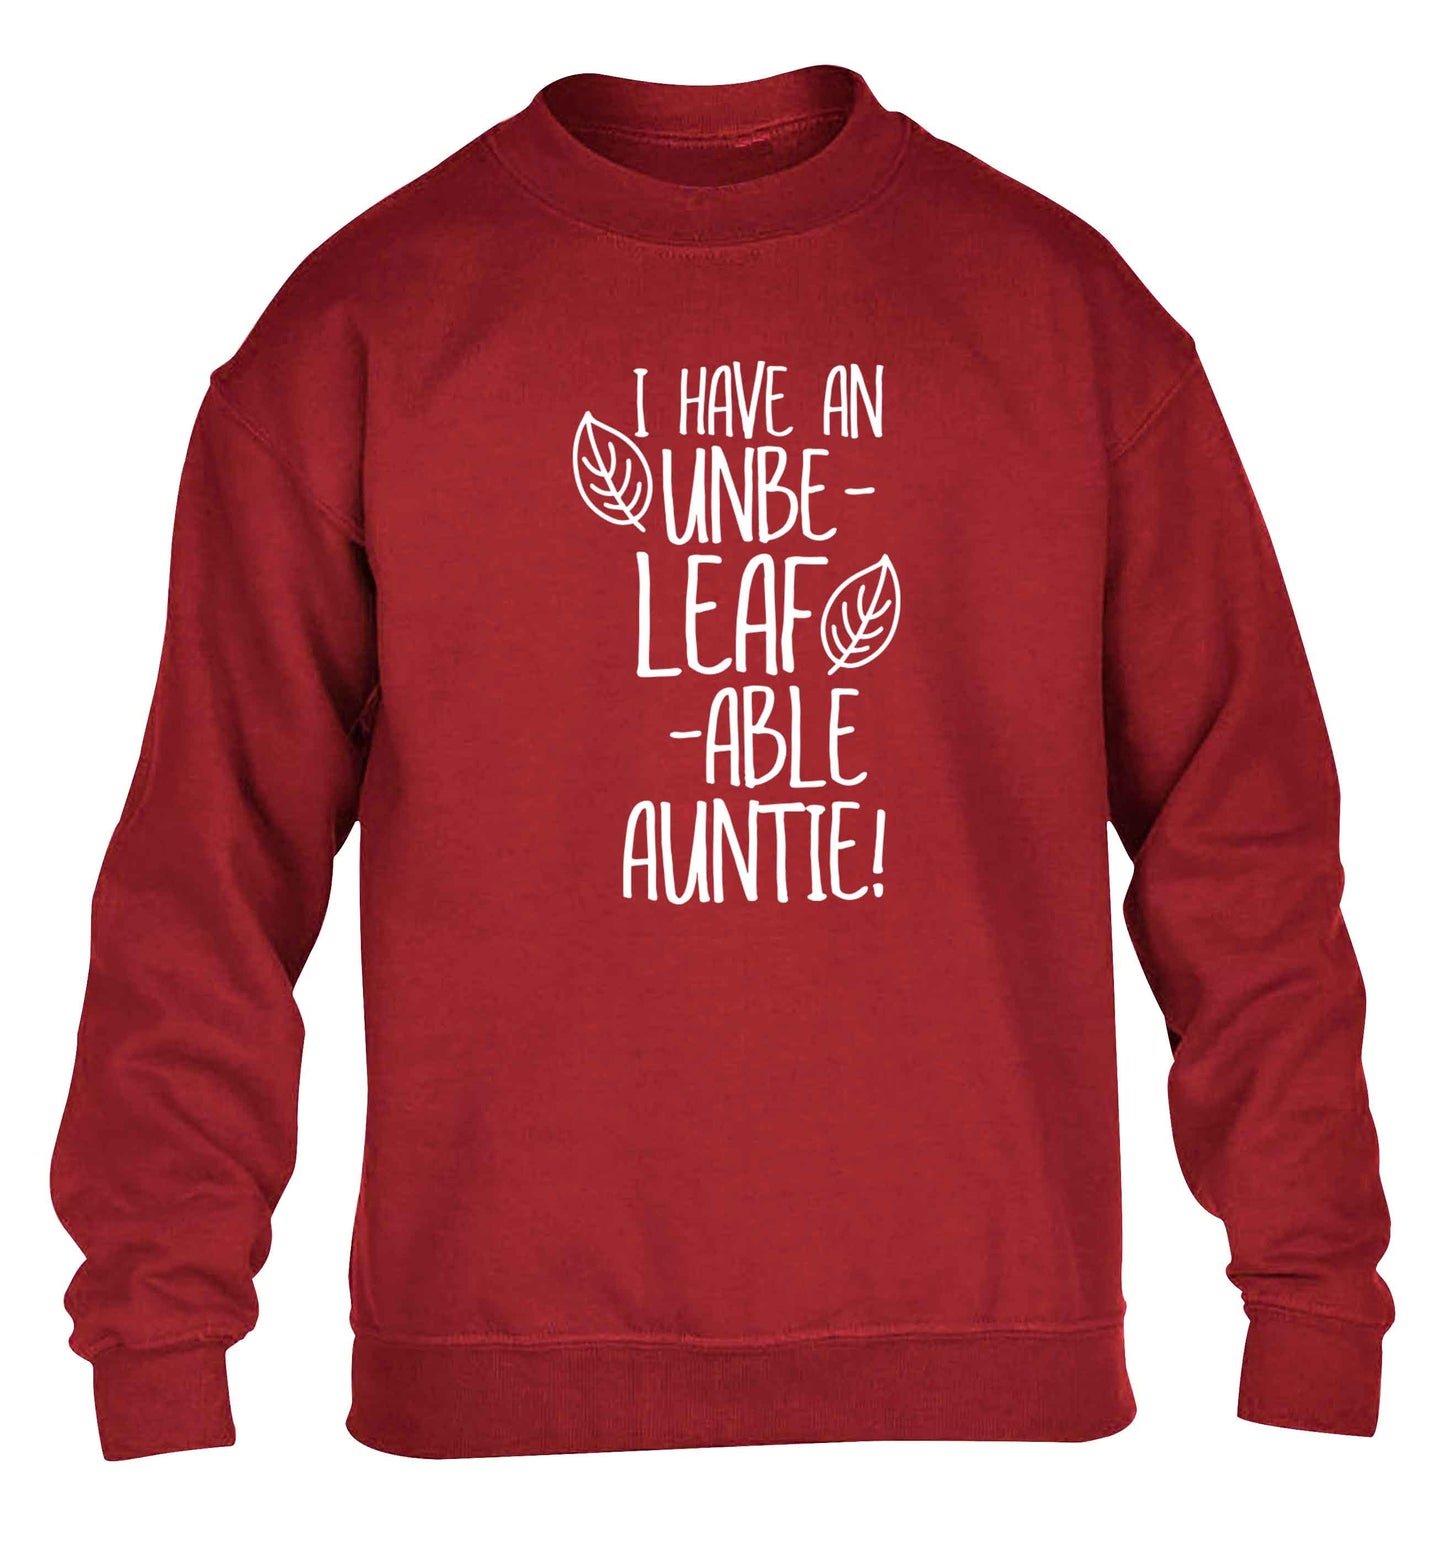 I have an unbe-leaf-able auntie children's grey sweater 12-13 Years